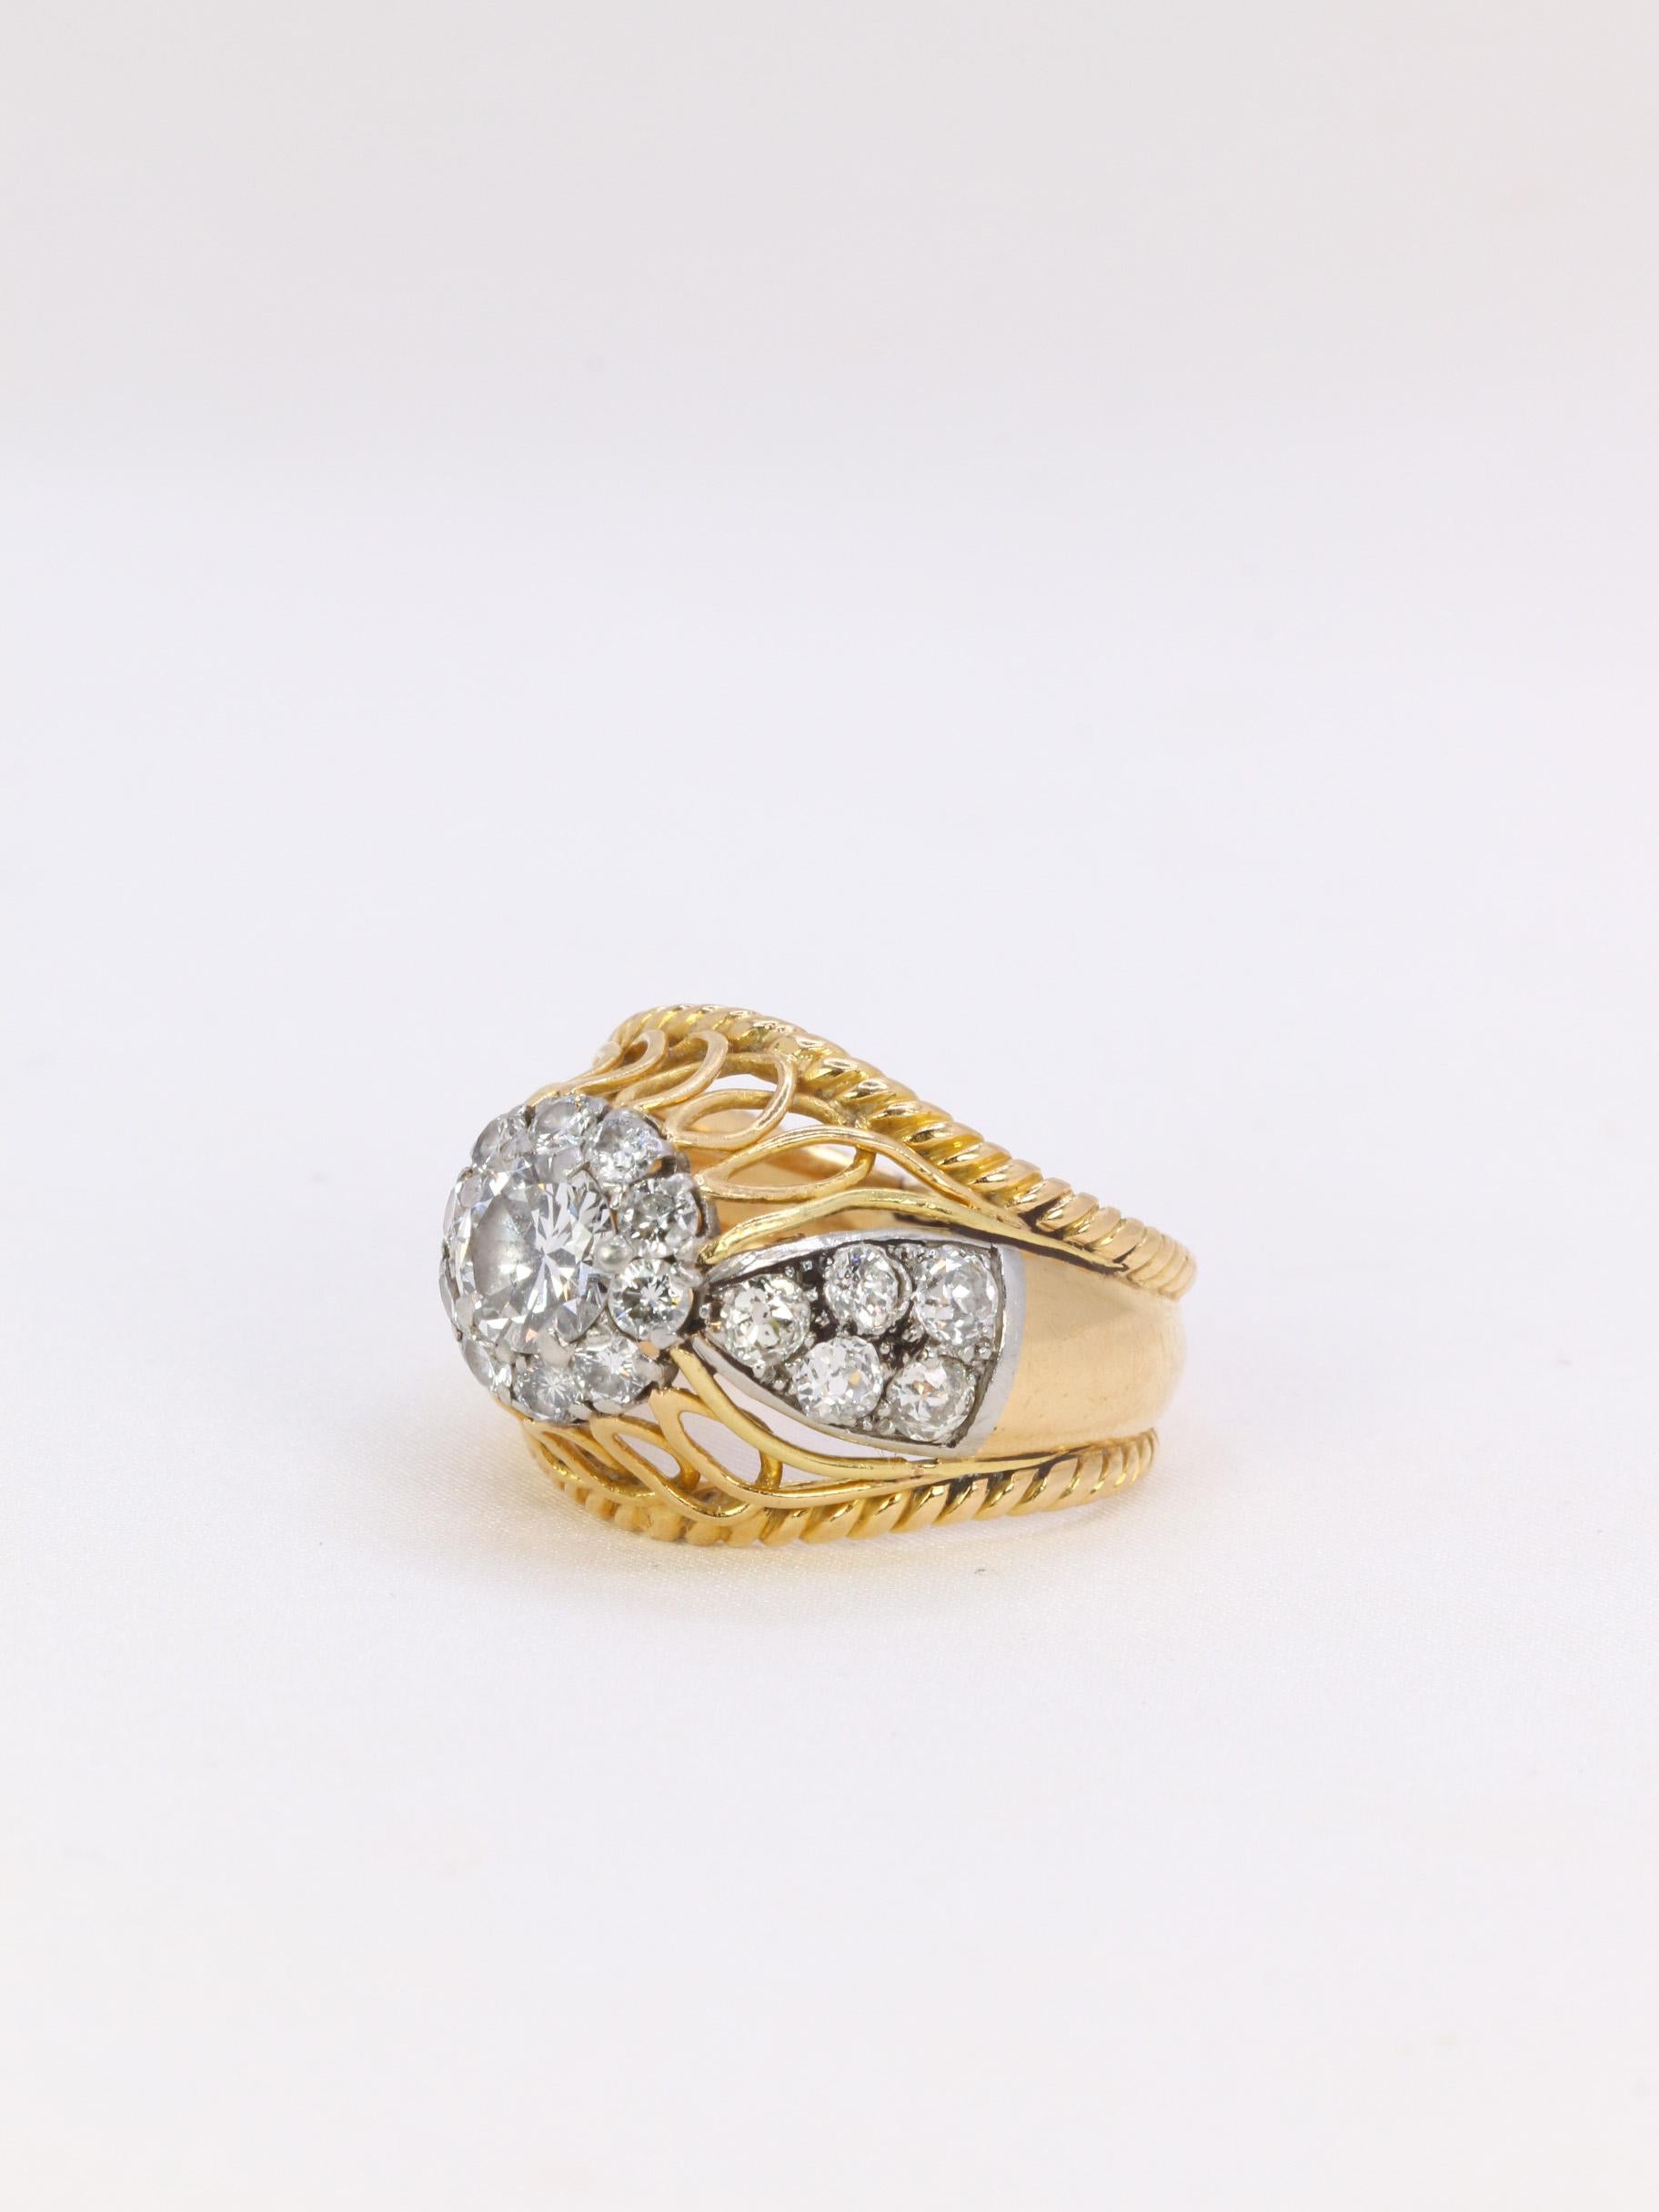 Vintage dome ring in yellow gold, platinum and 1 ct central diamond For Sale 1